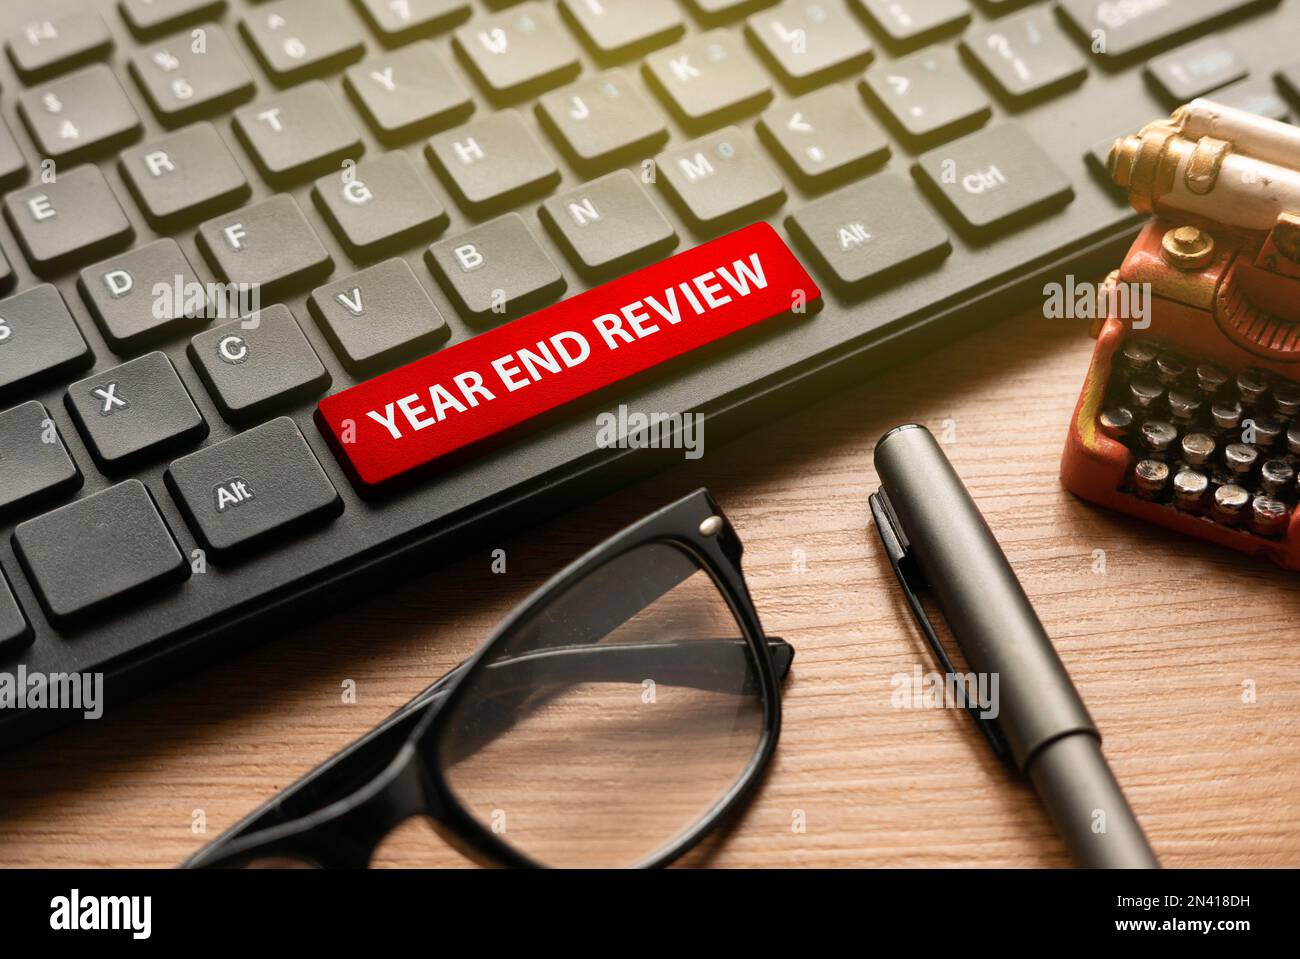 Glasses,pen, miniature typewriter and computer keyboard with red button written with Year End Review. Stock Photo